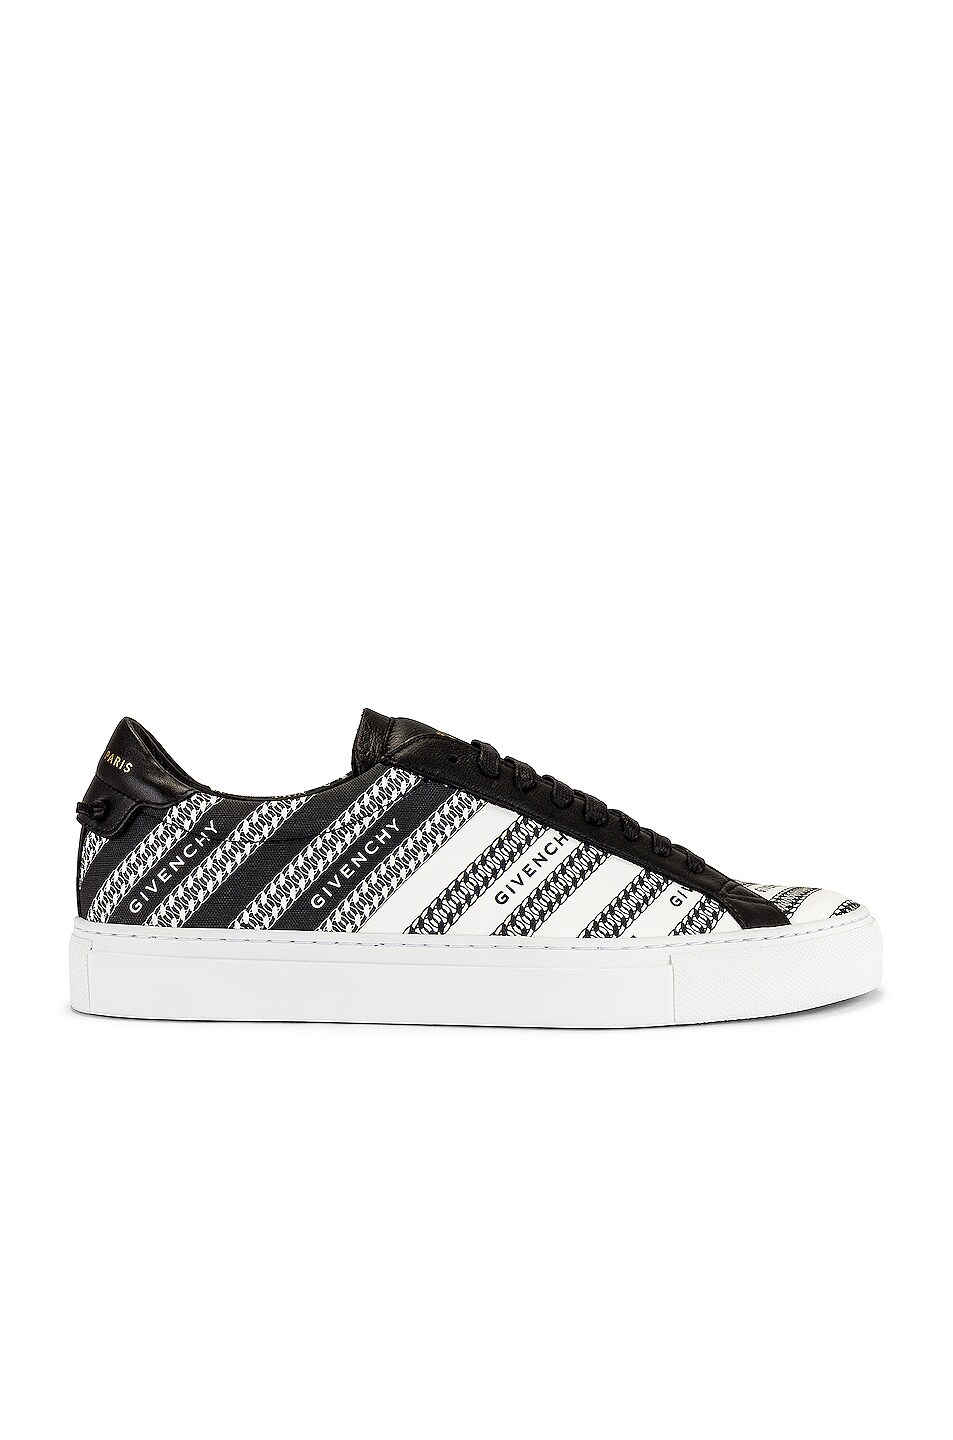 Image 1 of Givenchy Urban Street Low Sneaker in Black & White